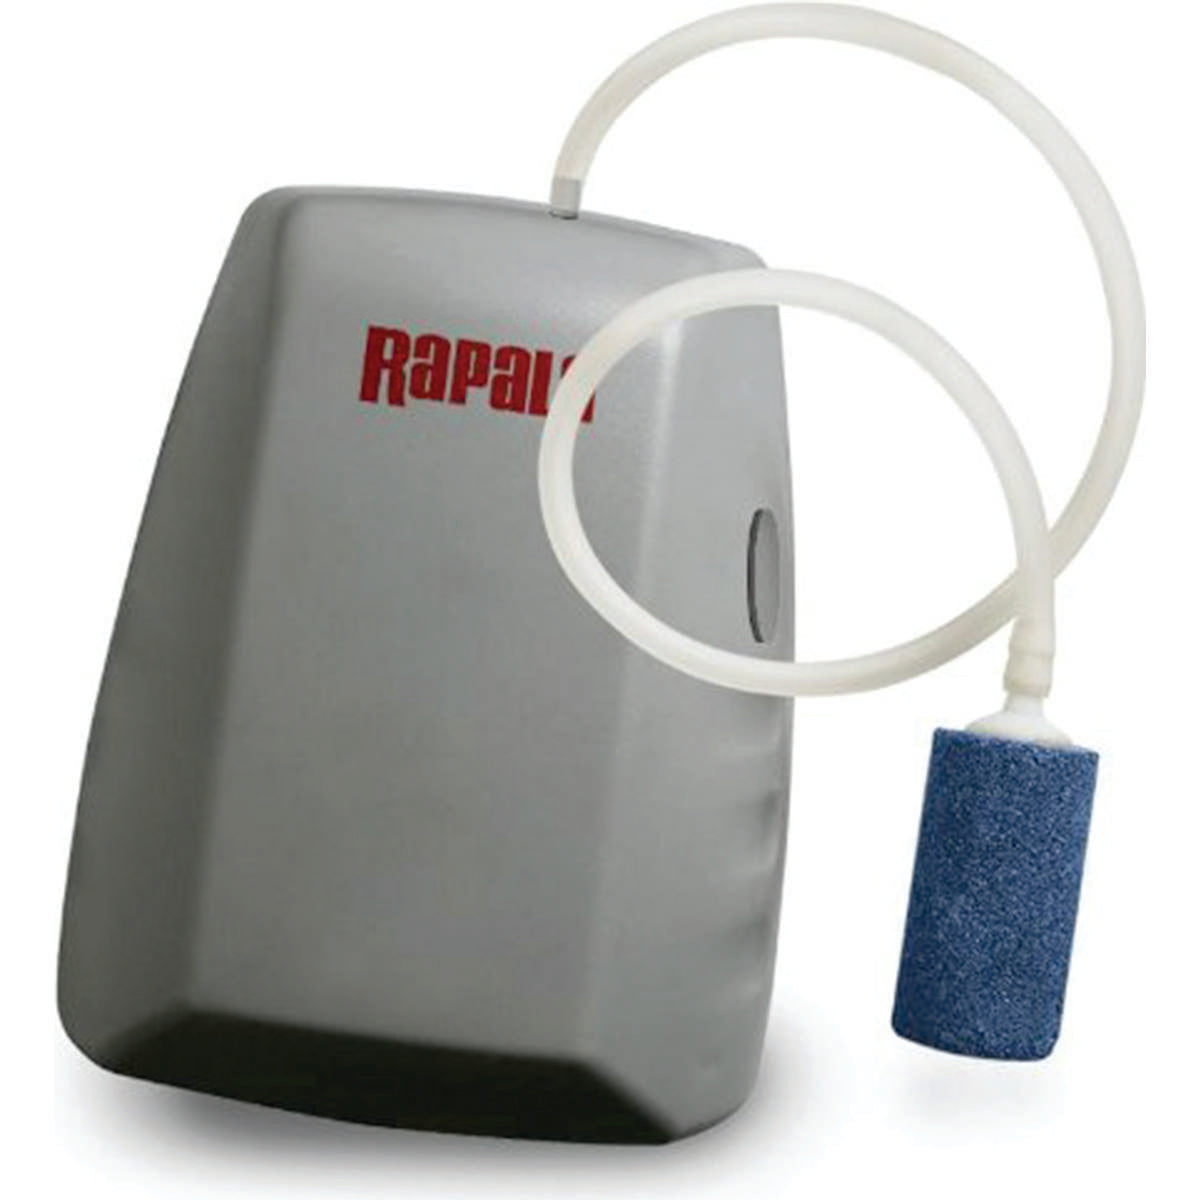 Photo of Rapala Bucket Aerator for sale at United Tackle Shops.